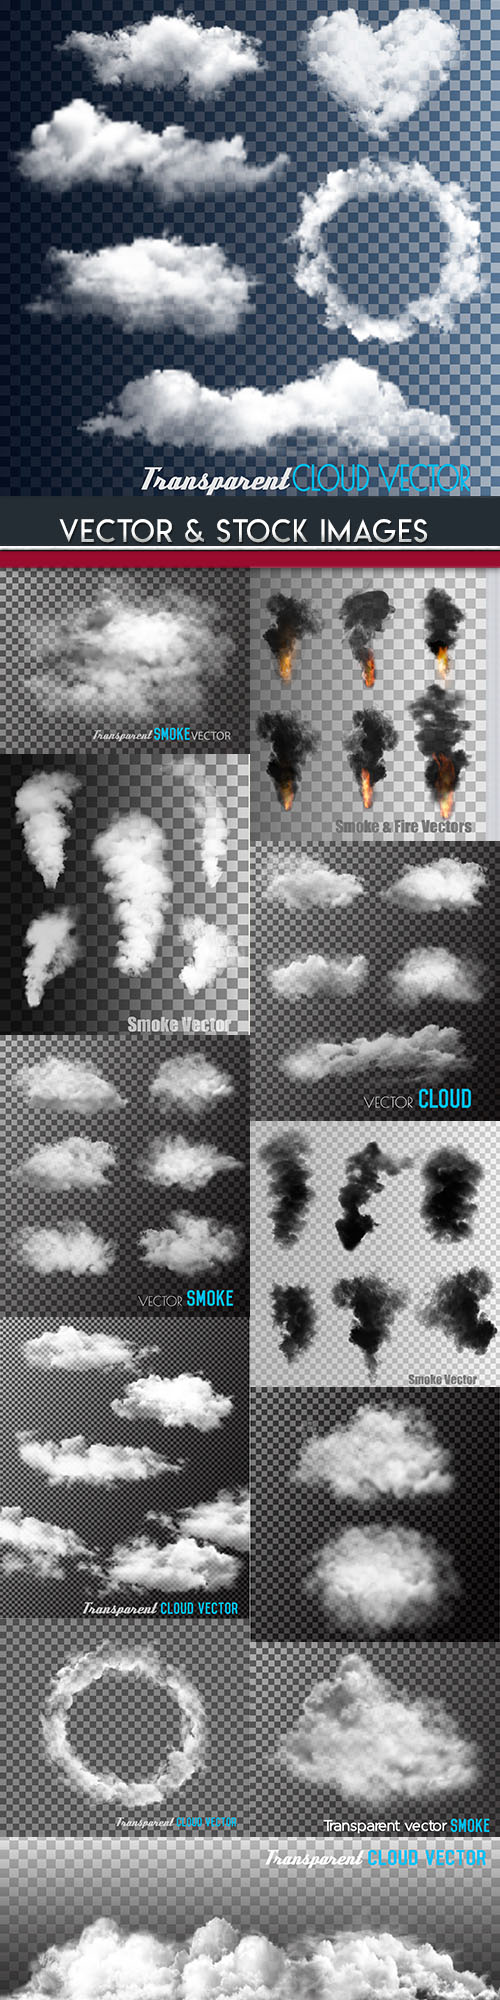 Smoke and clouds collection transparent background